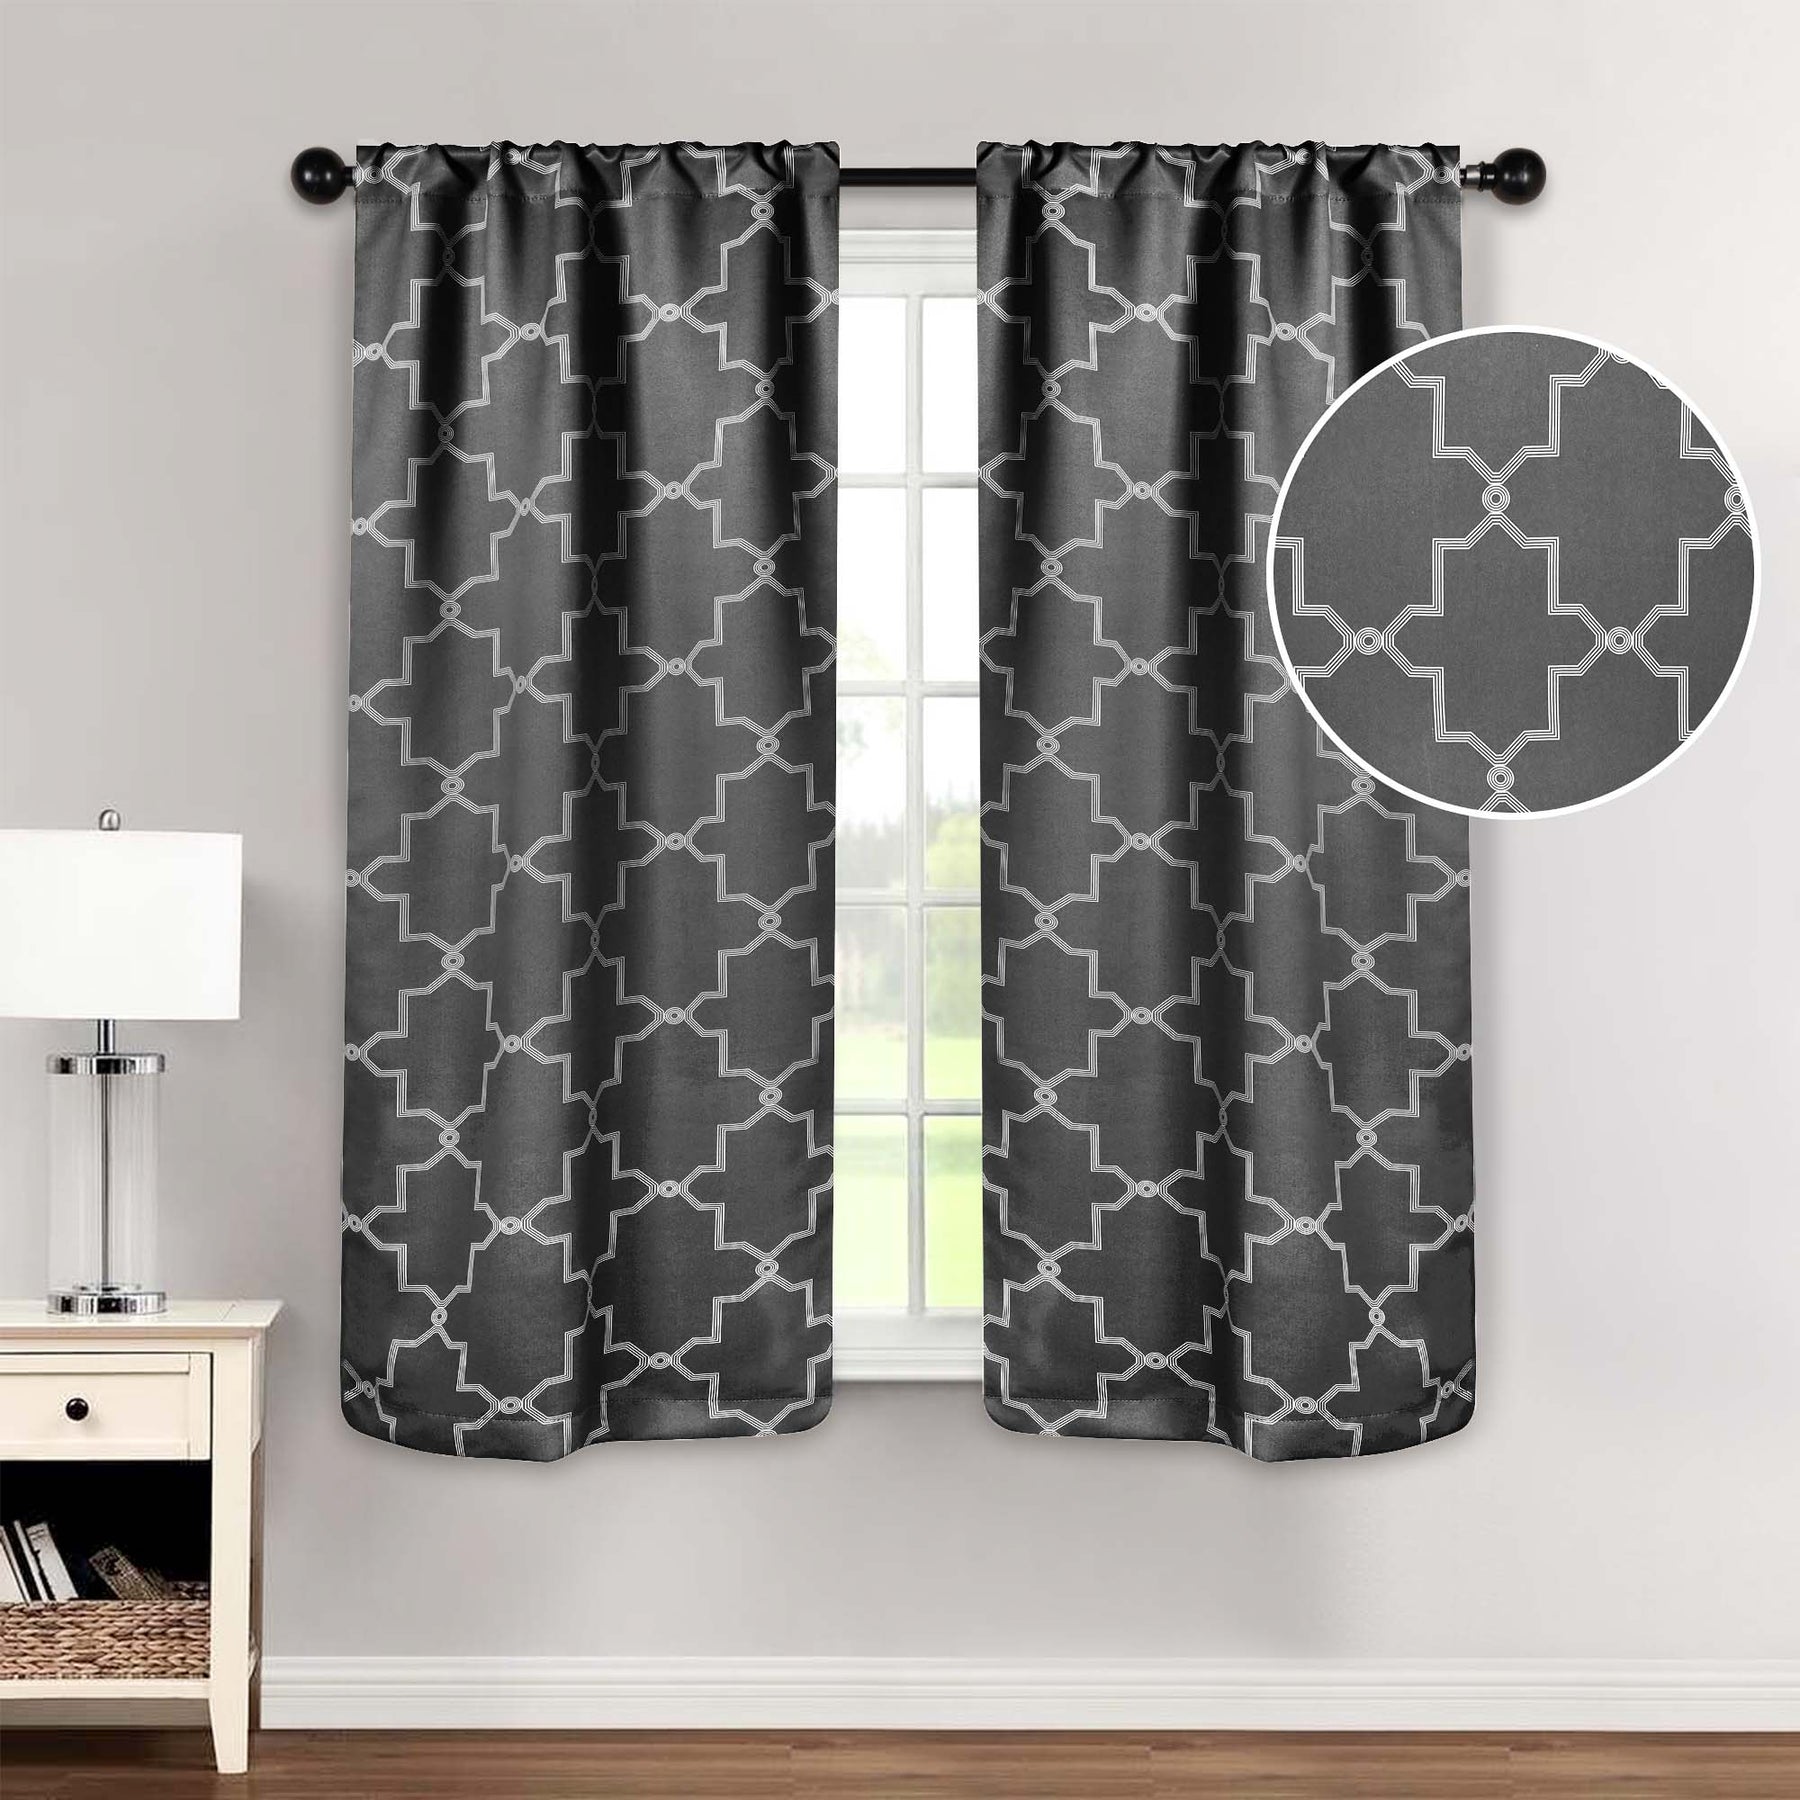 Superior Imperial Trellis Blackout Curtain Set of 2 Panels -  Charcoal